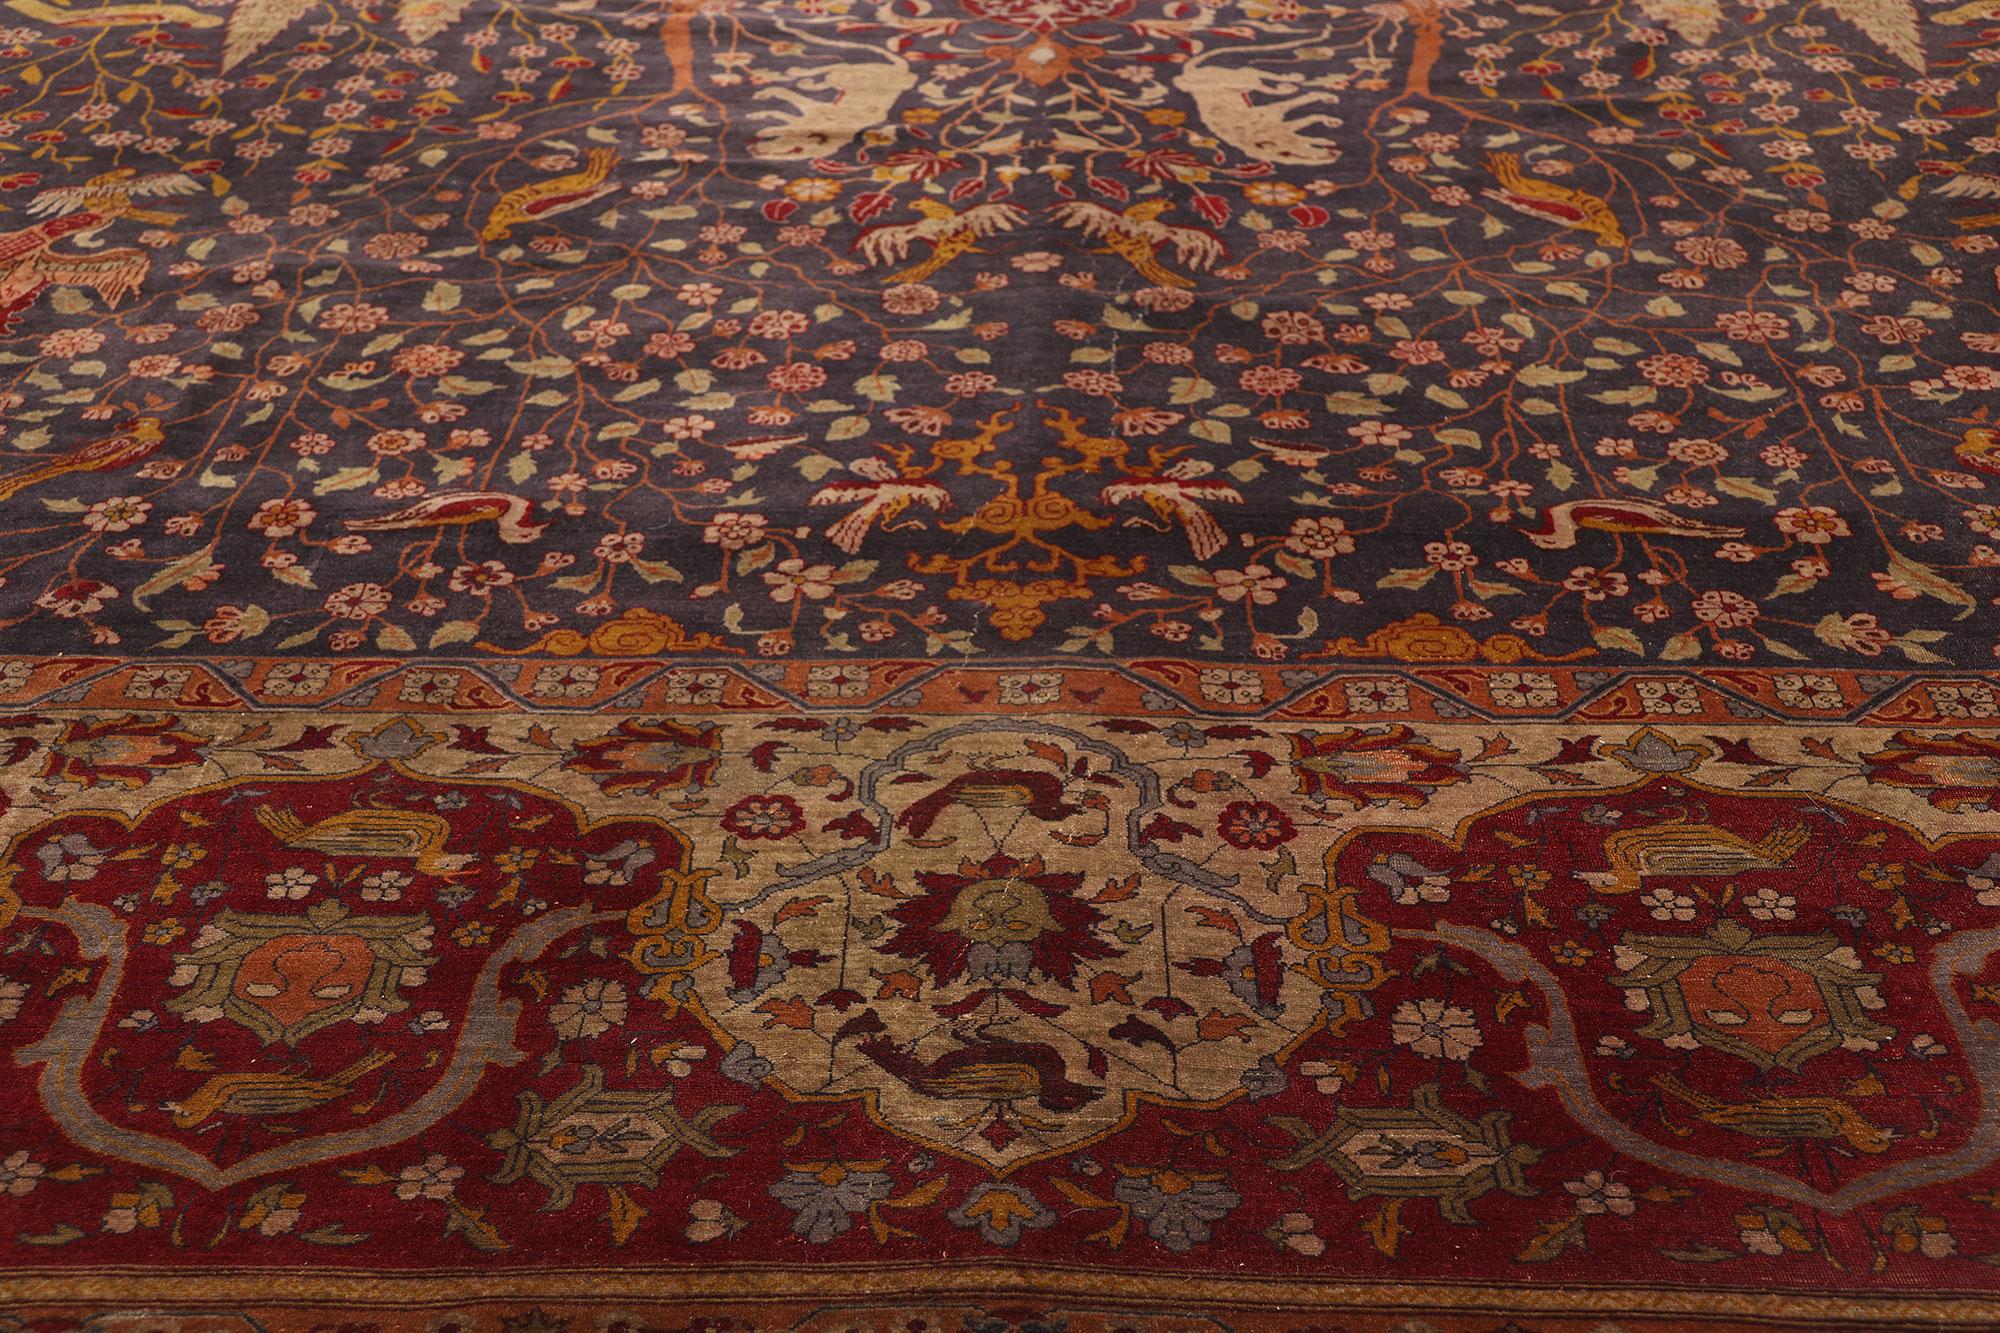 Antique Persian Isfahan Rug, Schwarzenberg Paradise Park Safavid Carpet In Good Condition For Sale In Dallas, TX